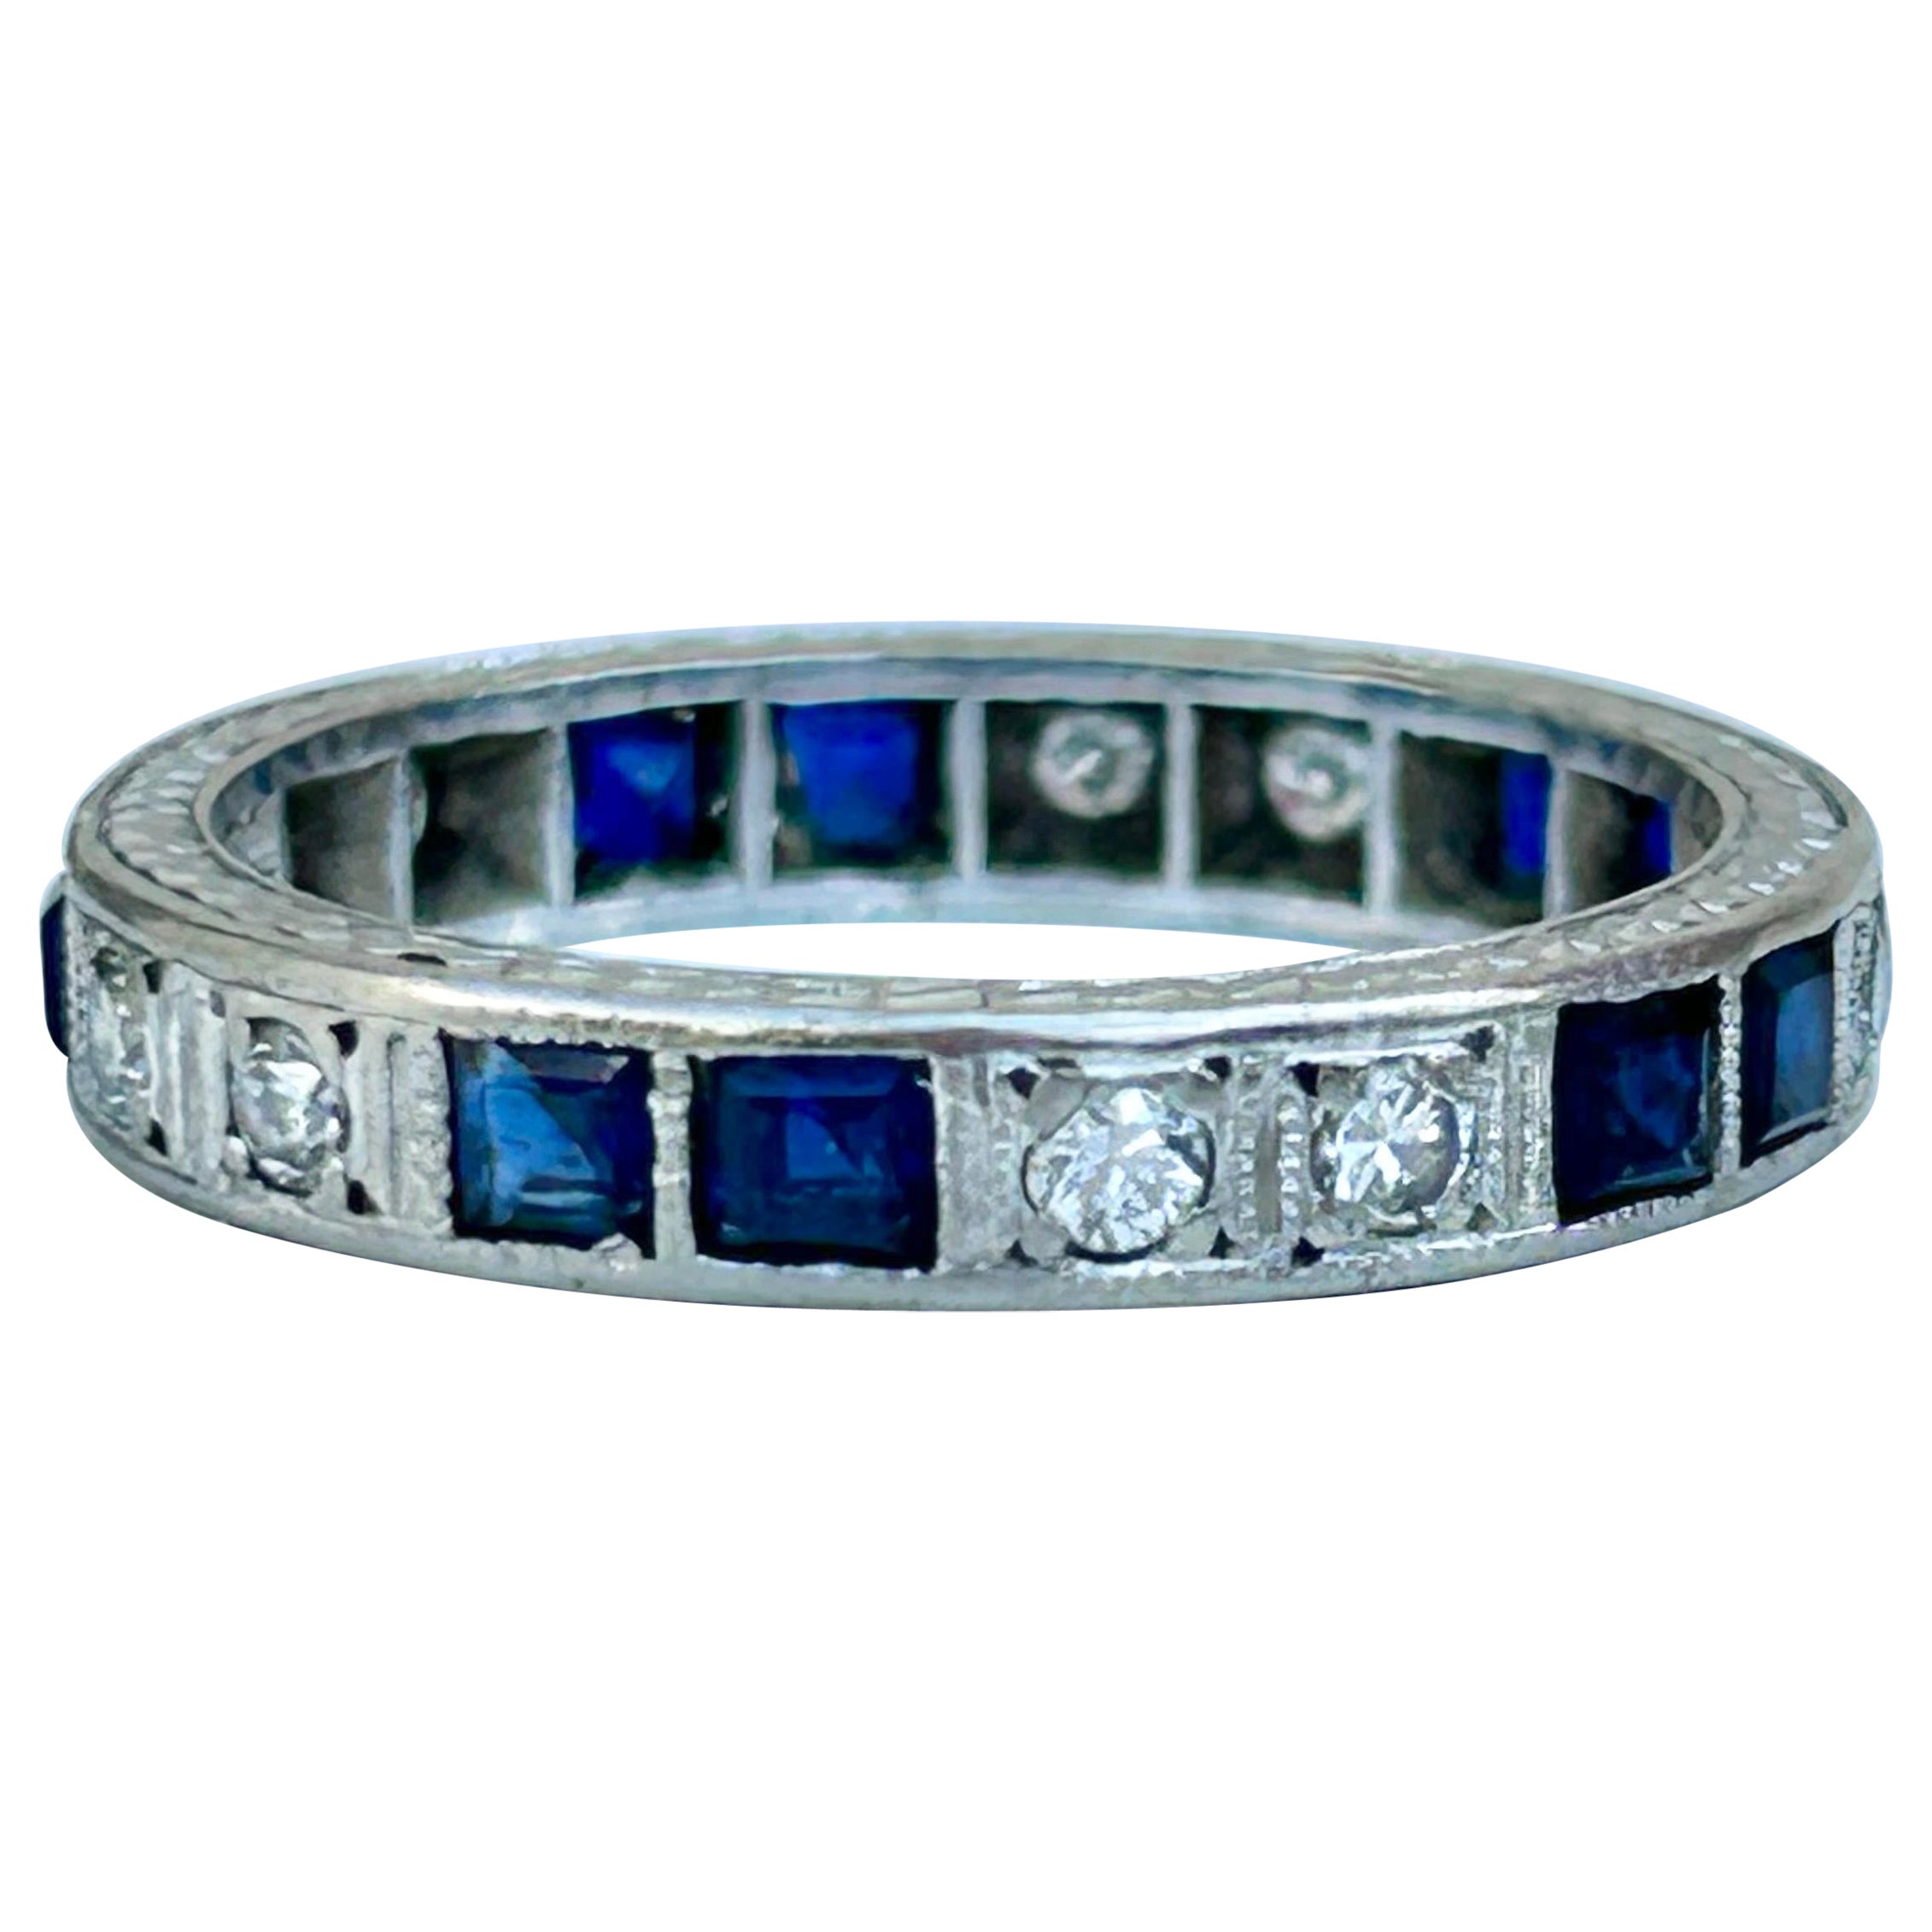 Vintage White Gold Sapphire and Diamond Full Eternity Band Ring